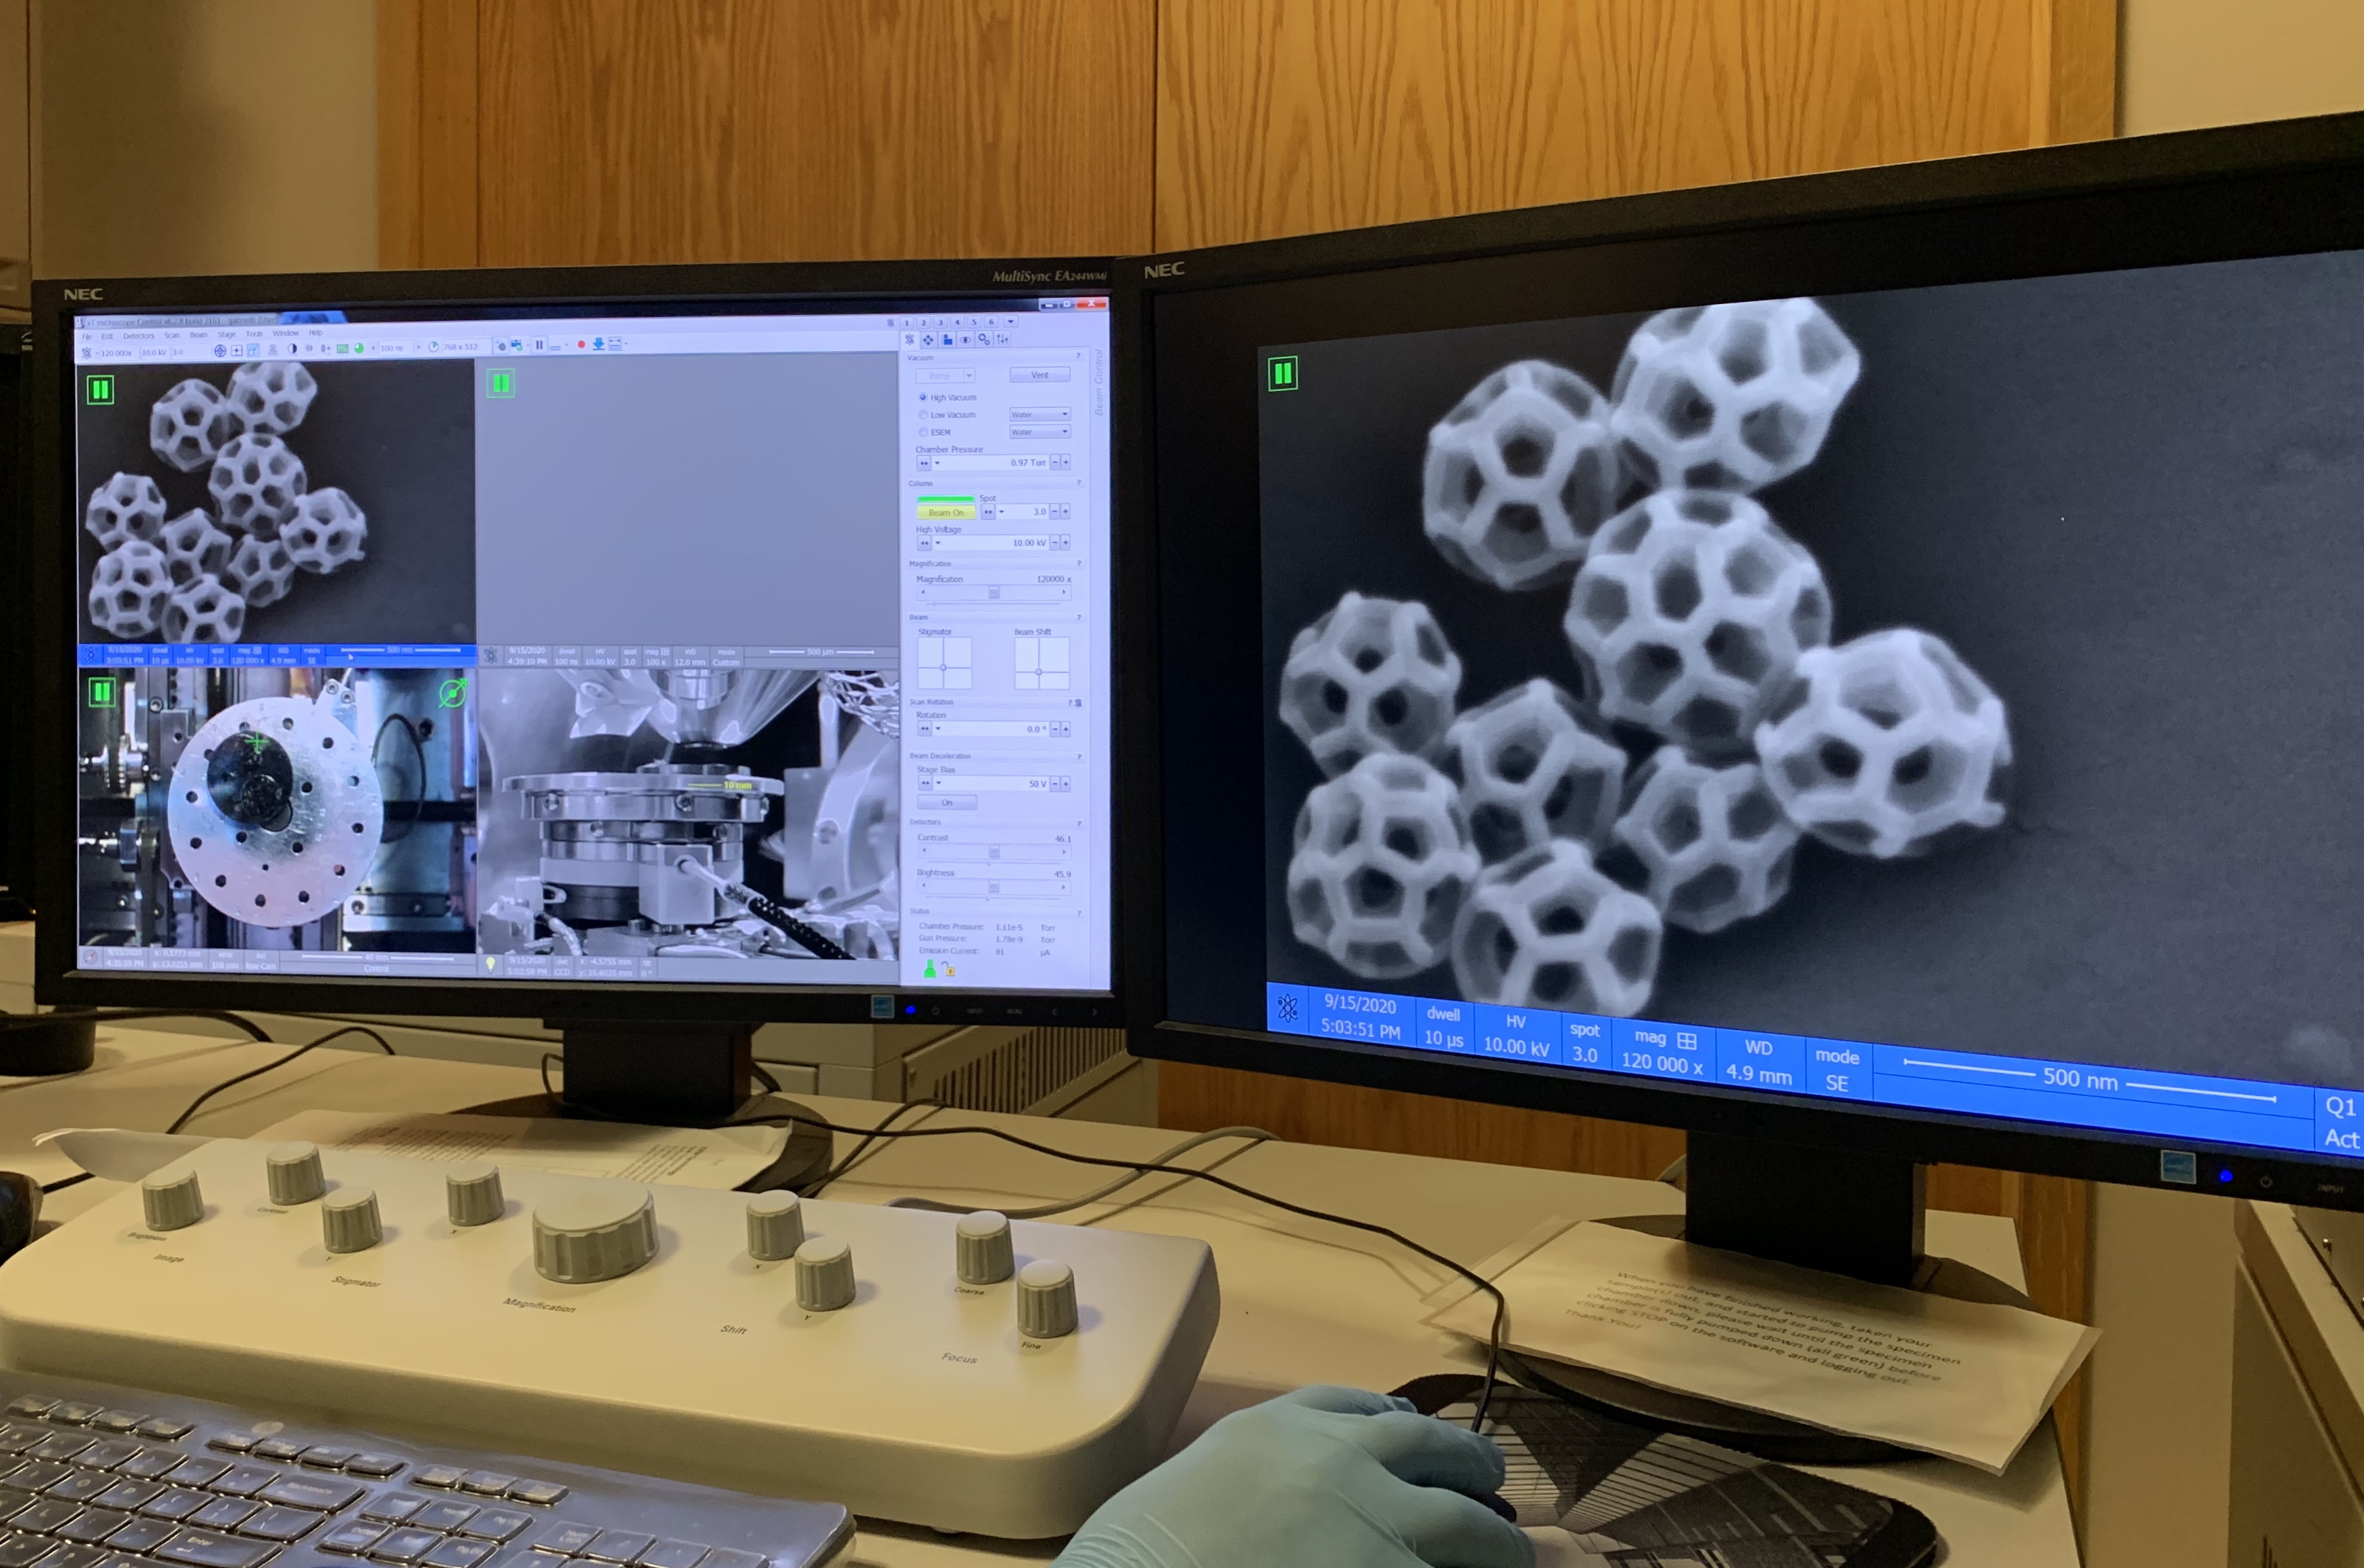 Dual computer screens show close-up images of brochosomes in black and white.